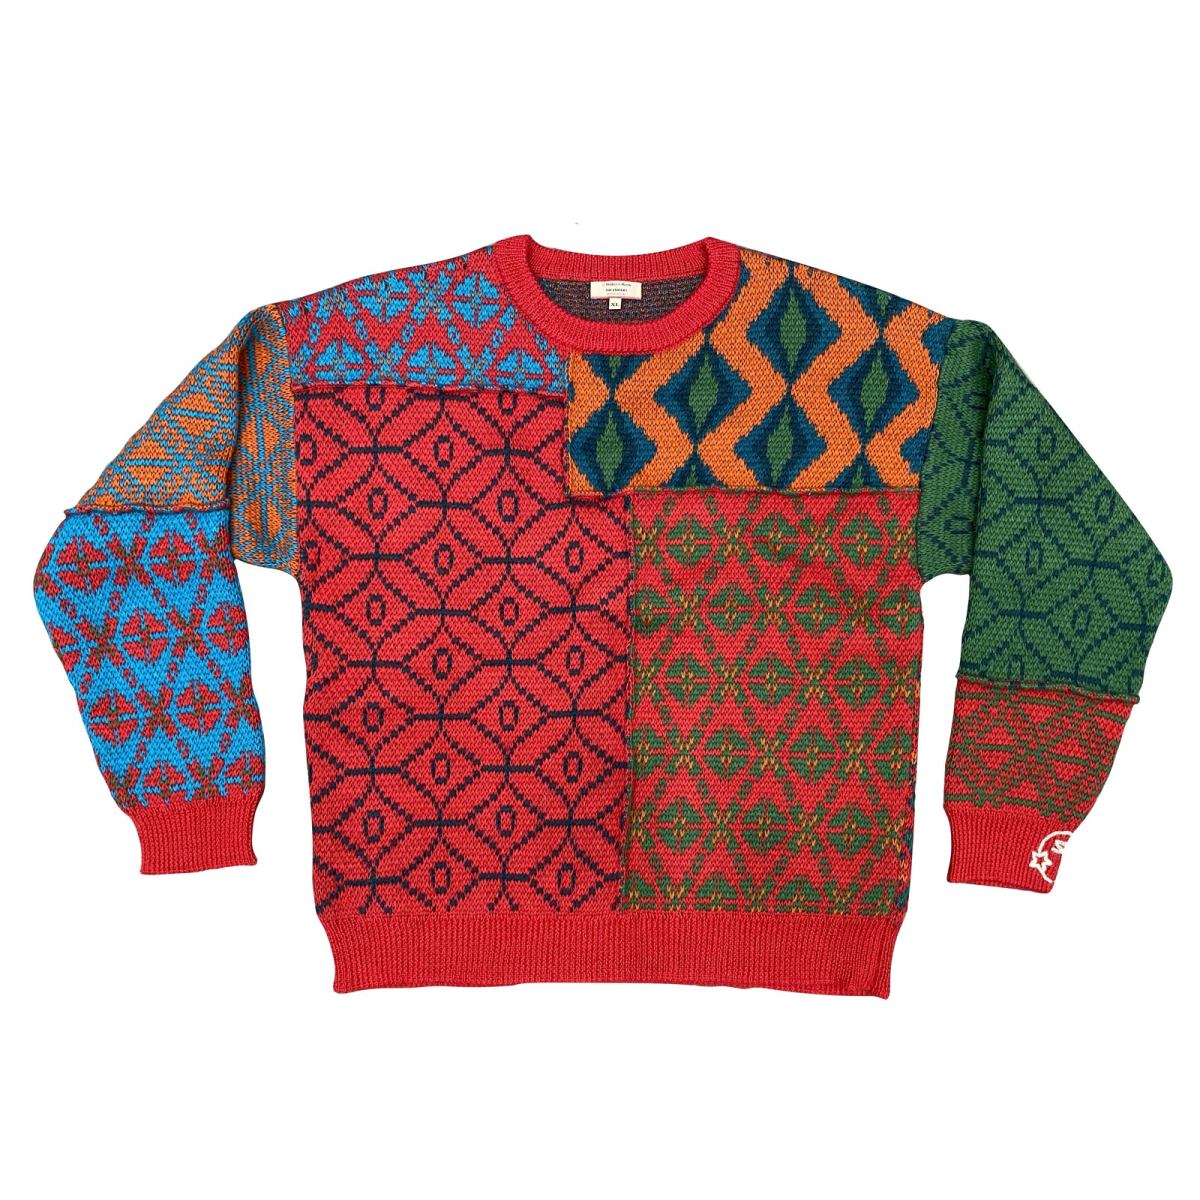 Patchwork Smash “Bourbon by the Fire” Sweater – COOL HUNTING®